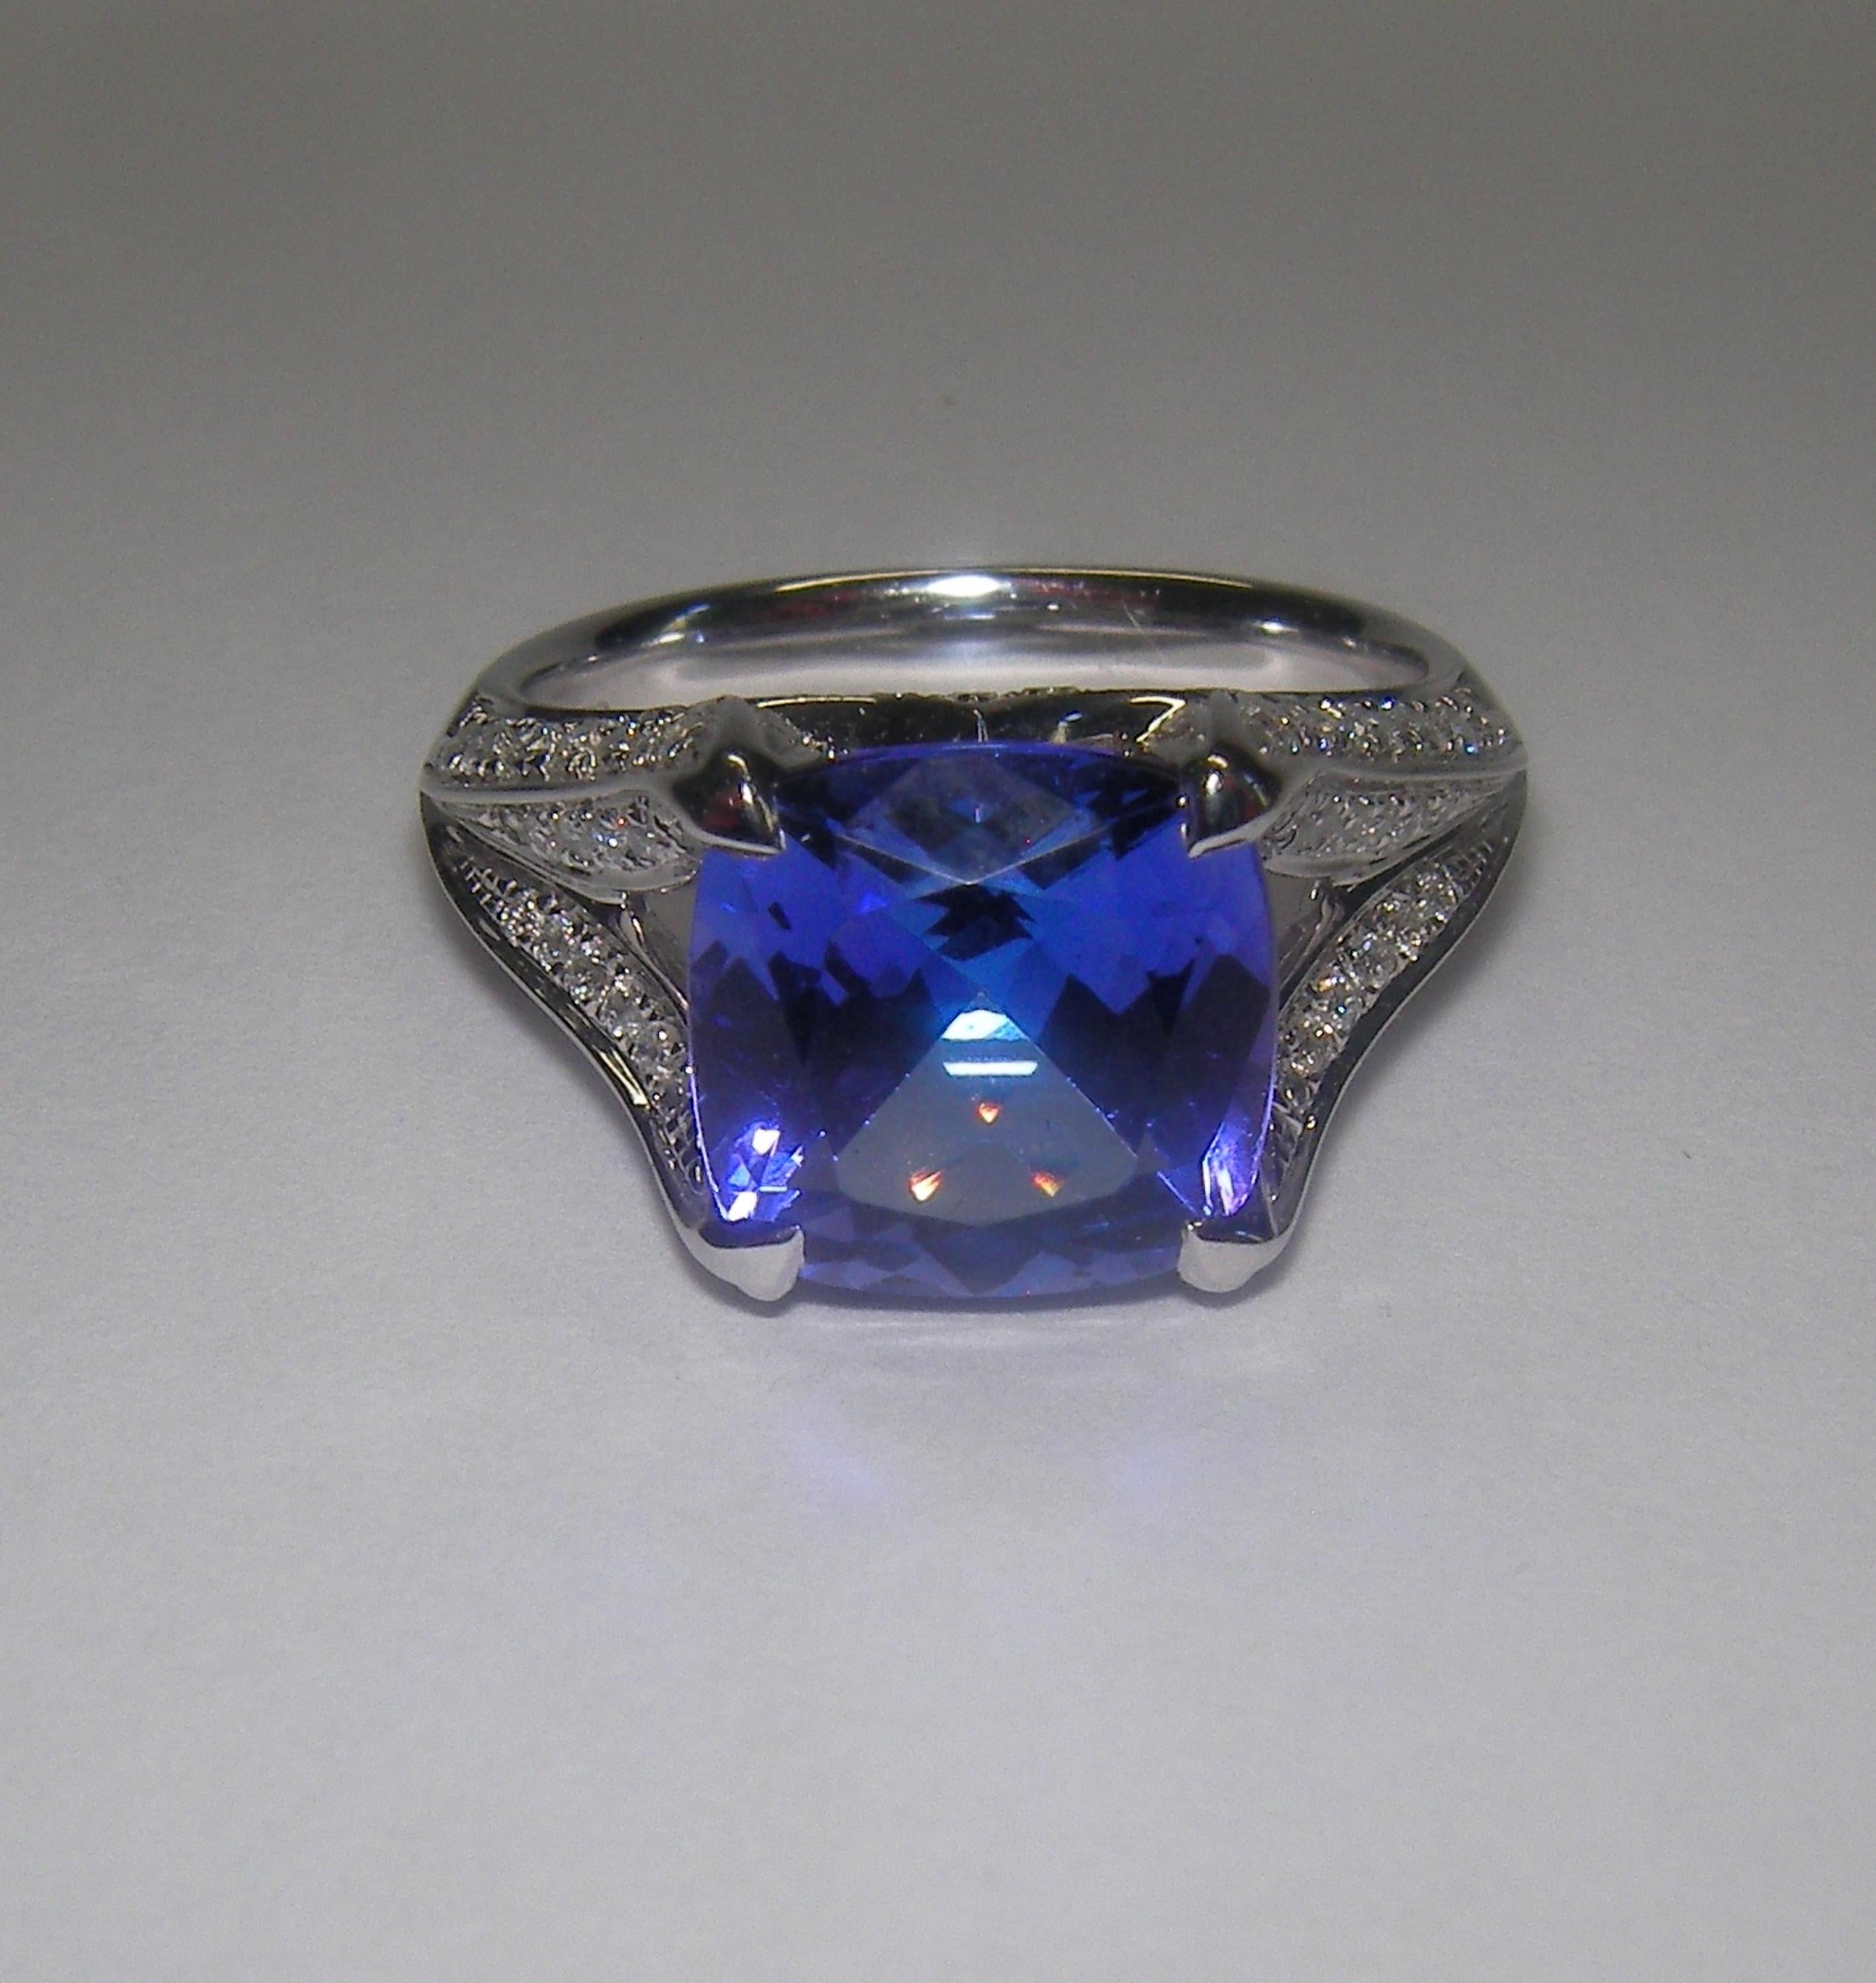 
Beautiful 18 Karat white gold cocktail ring with a stunning 3.5 carat tanzanite center stone. This ring combines classical with modern elements and can be worn every day! 

82 Diamonds 0.65 carat
1 Tansanite 3.50 carat

Size EU 53.5 US